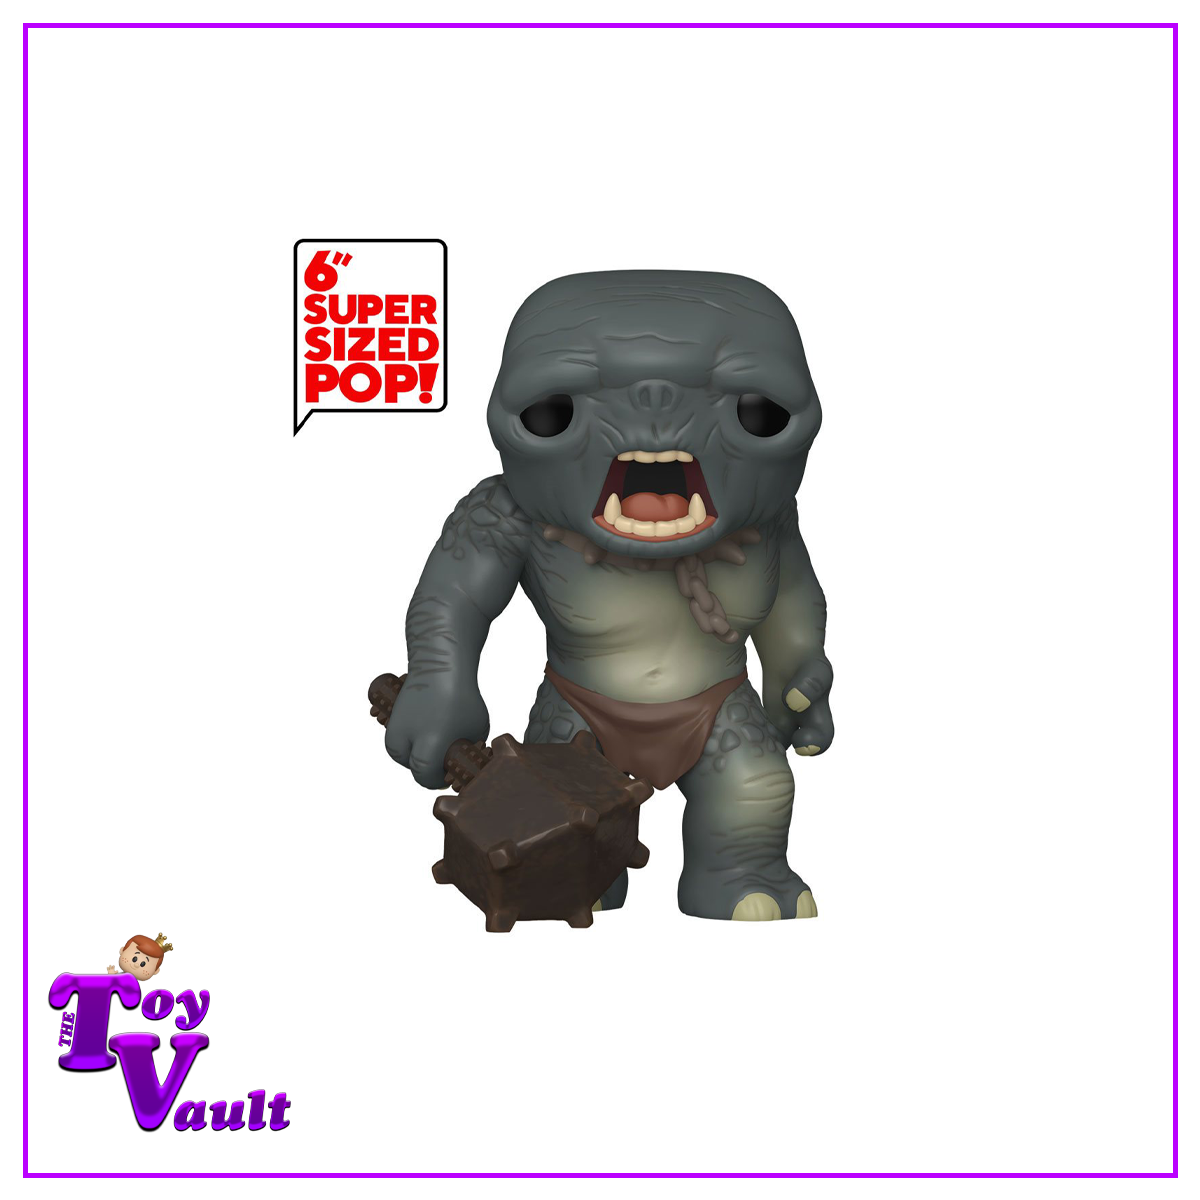 Funko Pop! Movies Lord of the Rings - Cave Troll #1580 (6-inch) Preorder